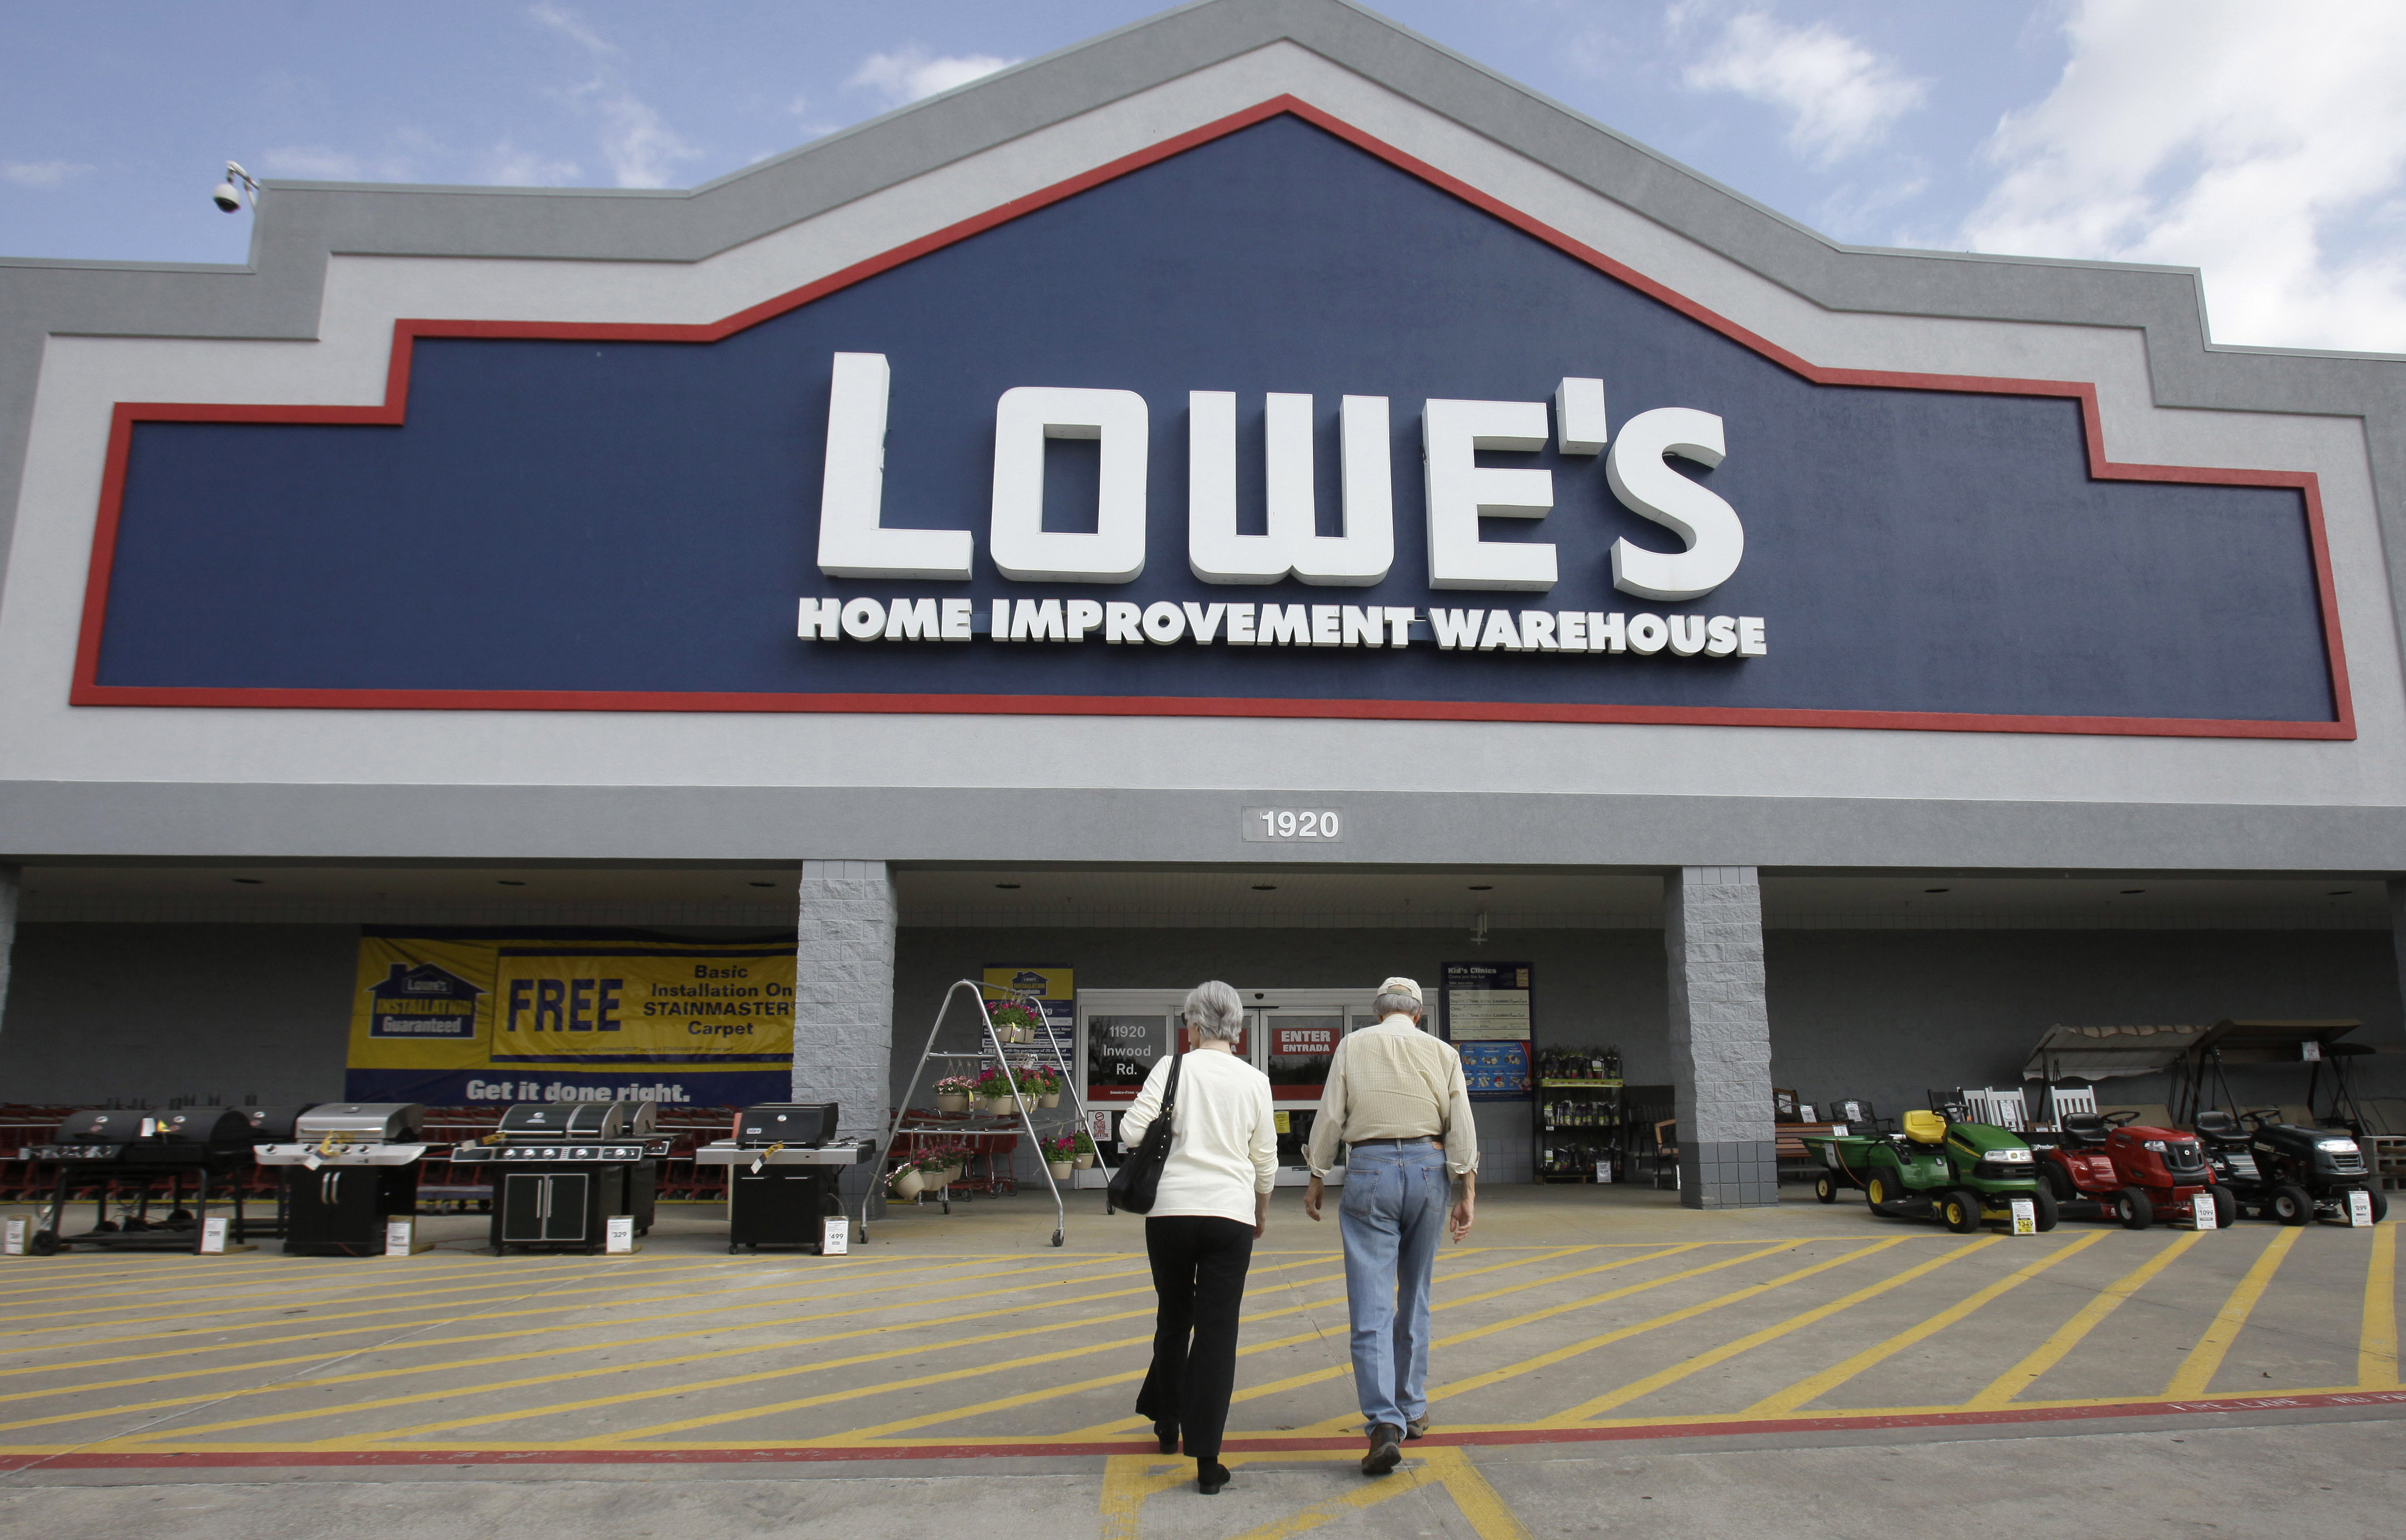 Lowes Coupons In Store (Printable Coupons) - 2019 - Lowes Coupon Printable Free